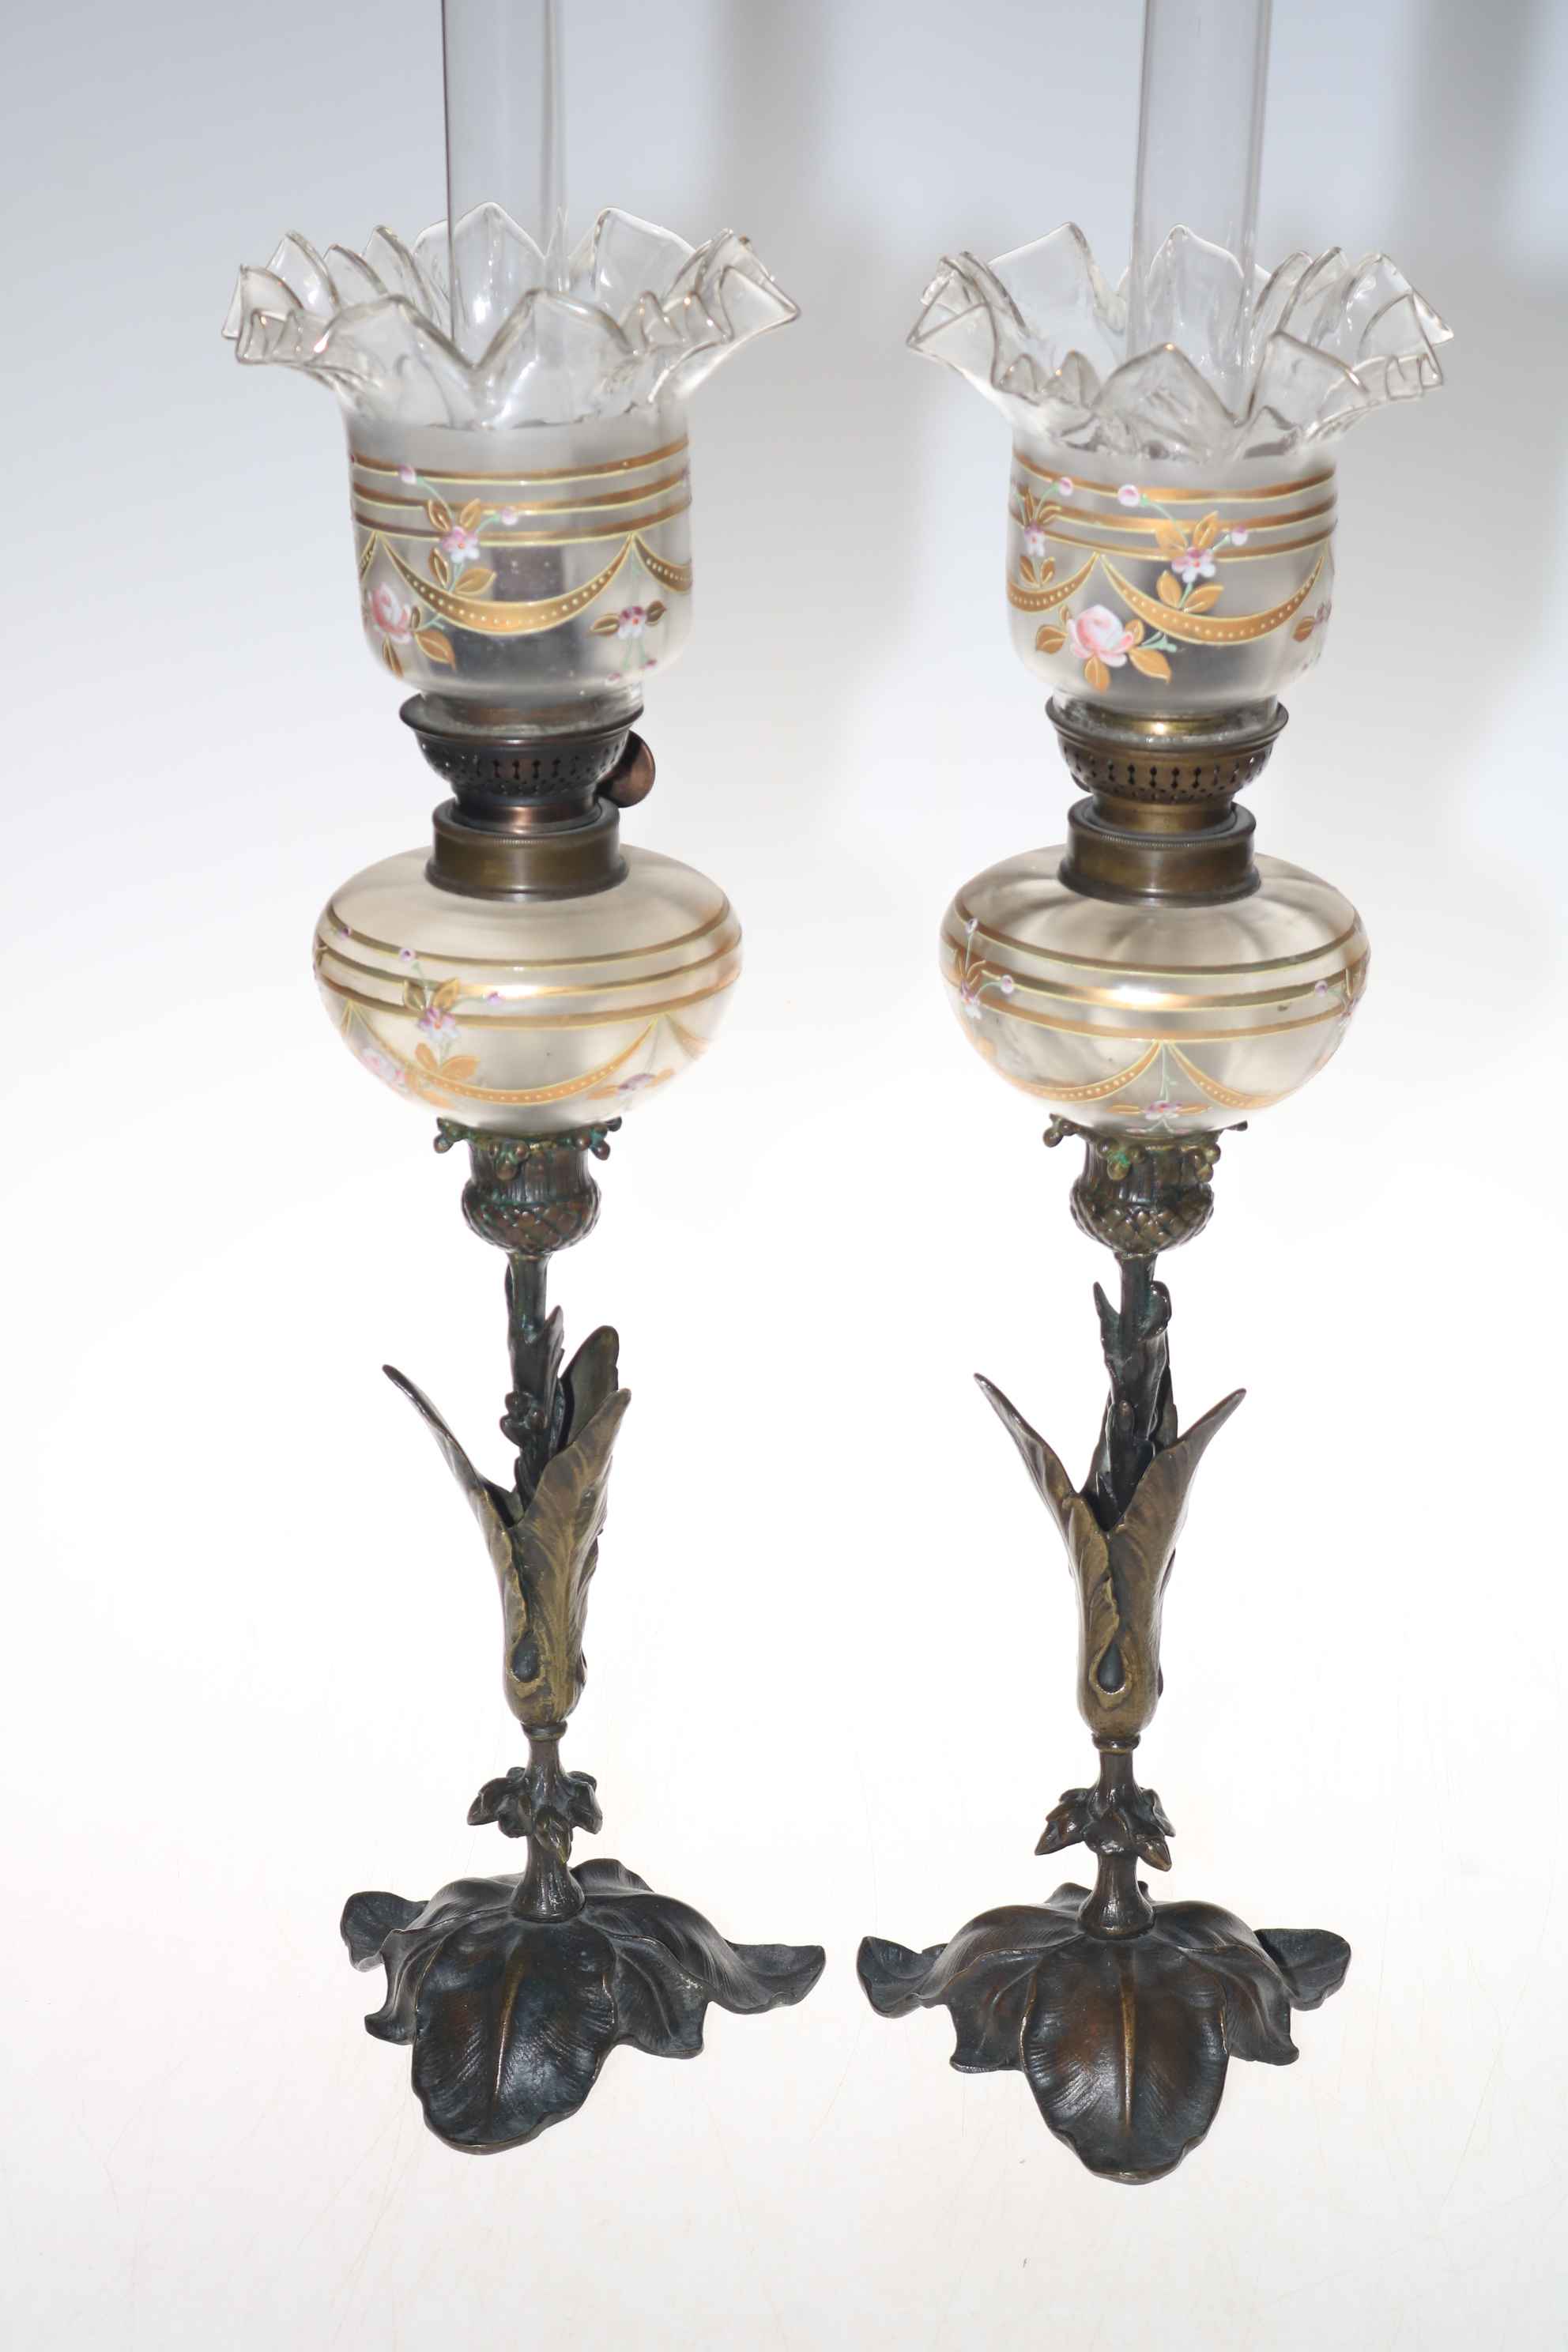 Pair of French leaf design metal based oil lamps with enamel and gilt decorated reservoir and